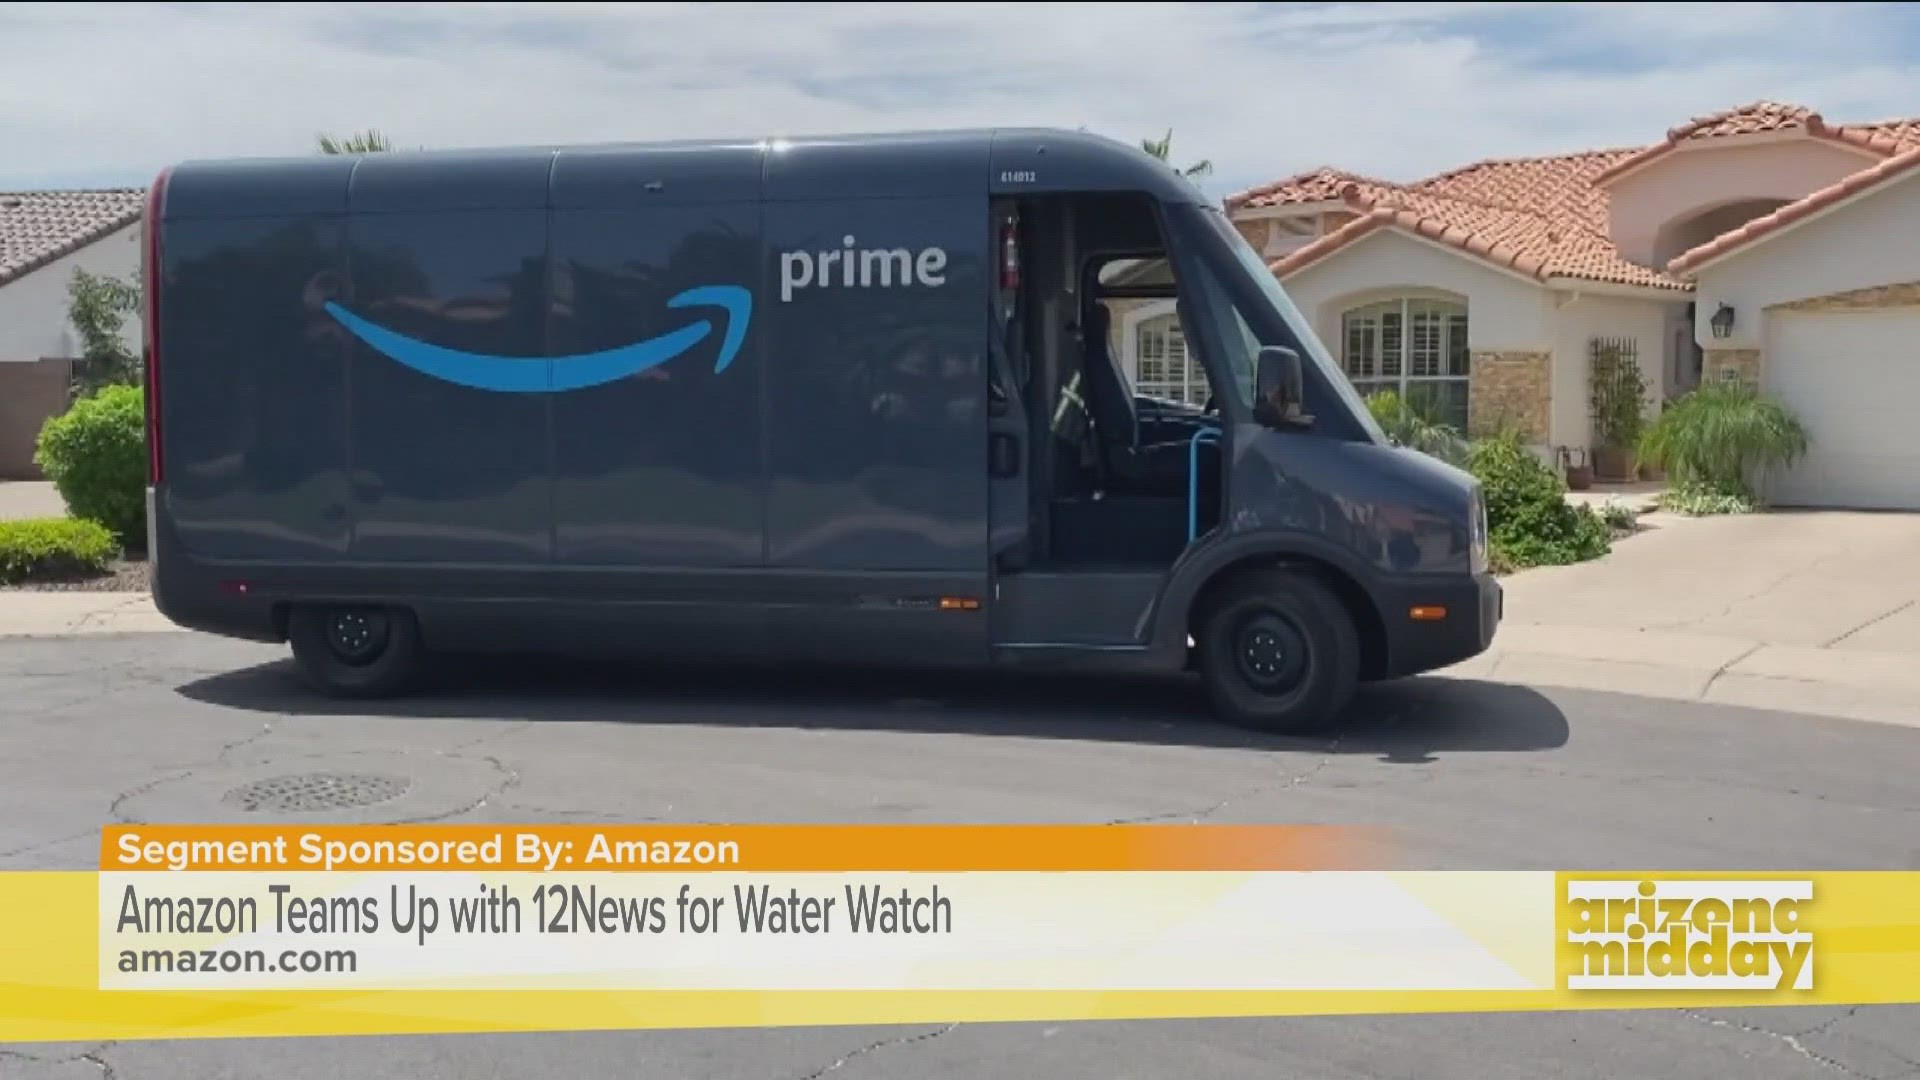 John Pombier, Sr Community Engagement Manager, explains the importance of keeping Amazon's employees cool during the heat and why water safety is important to them.